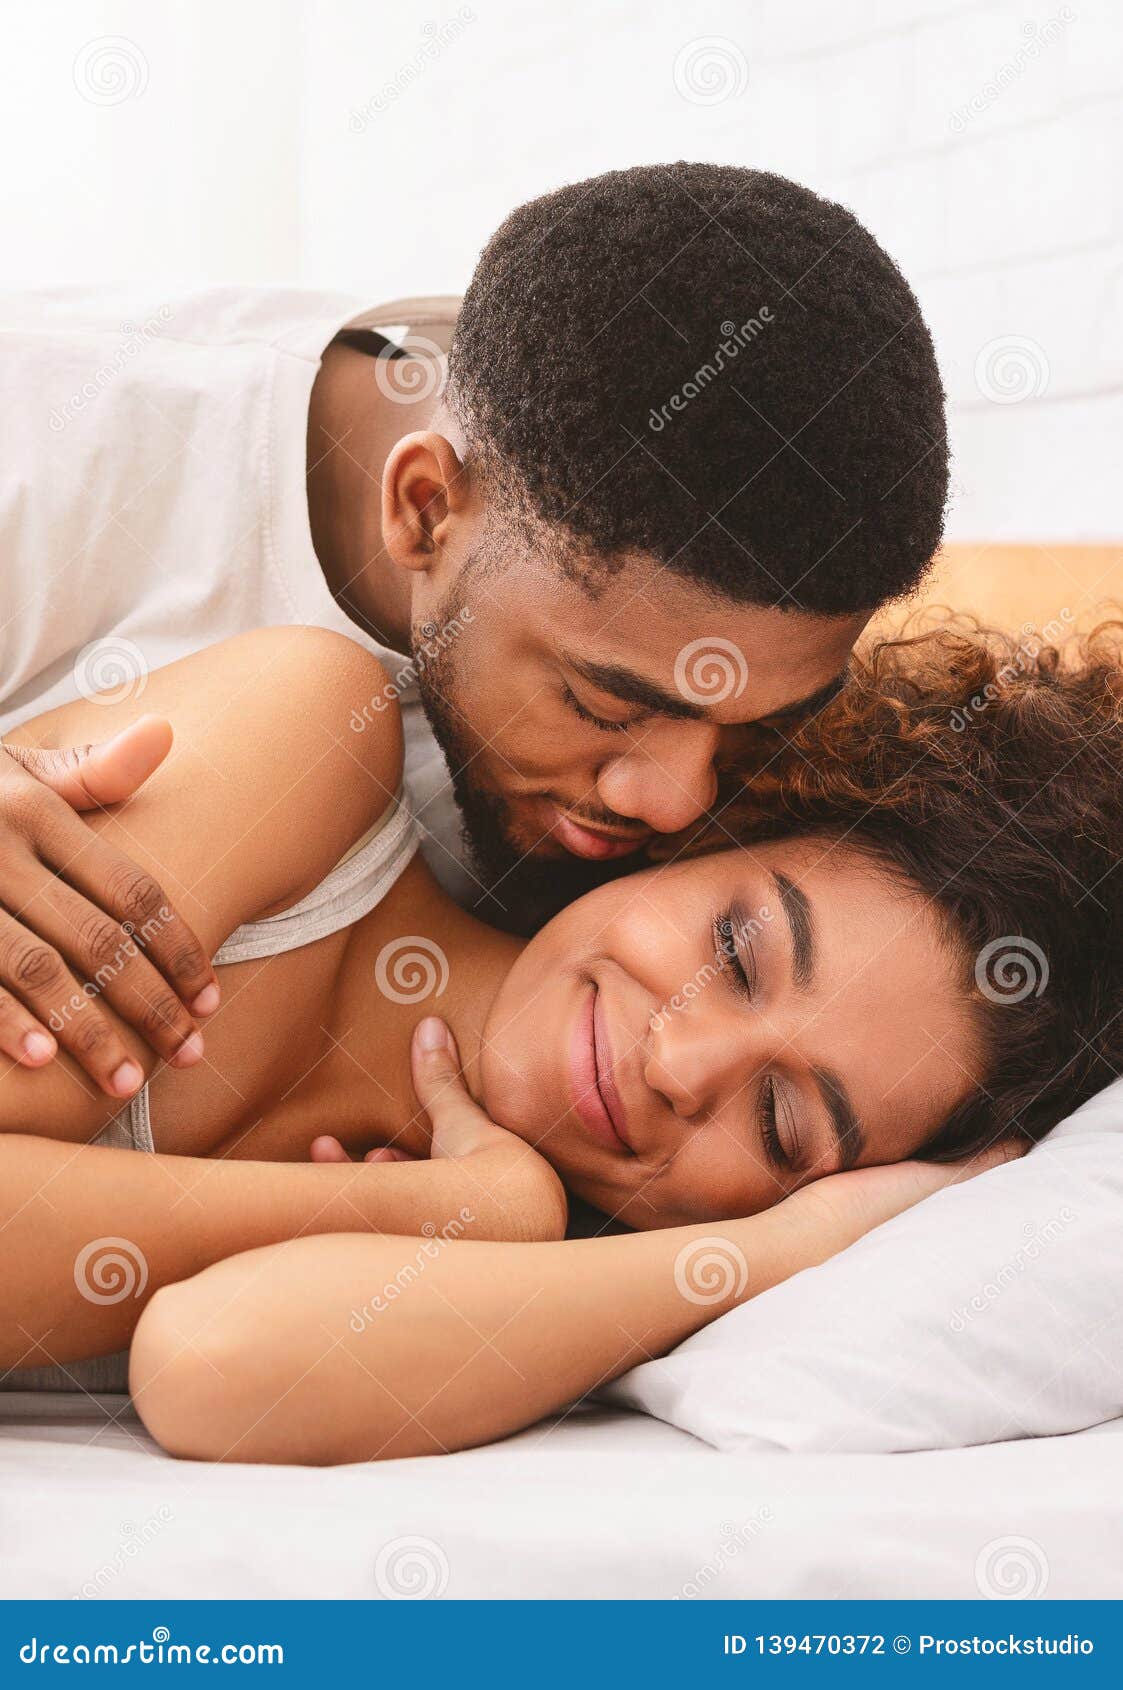 Handsome Man Kissing Woman on Cheek Under in Bed Stock Photo image